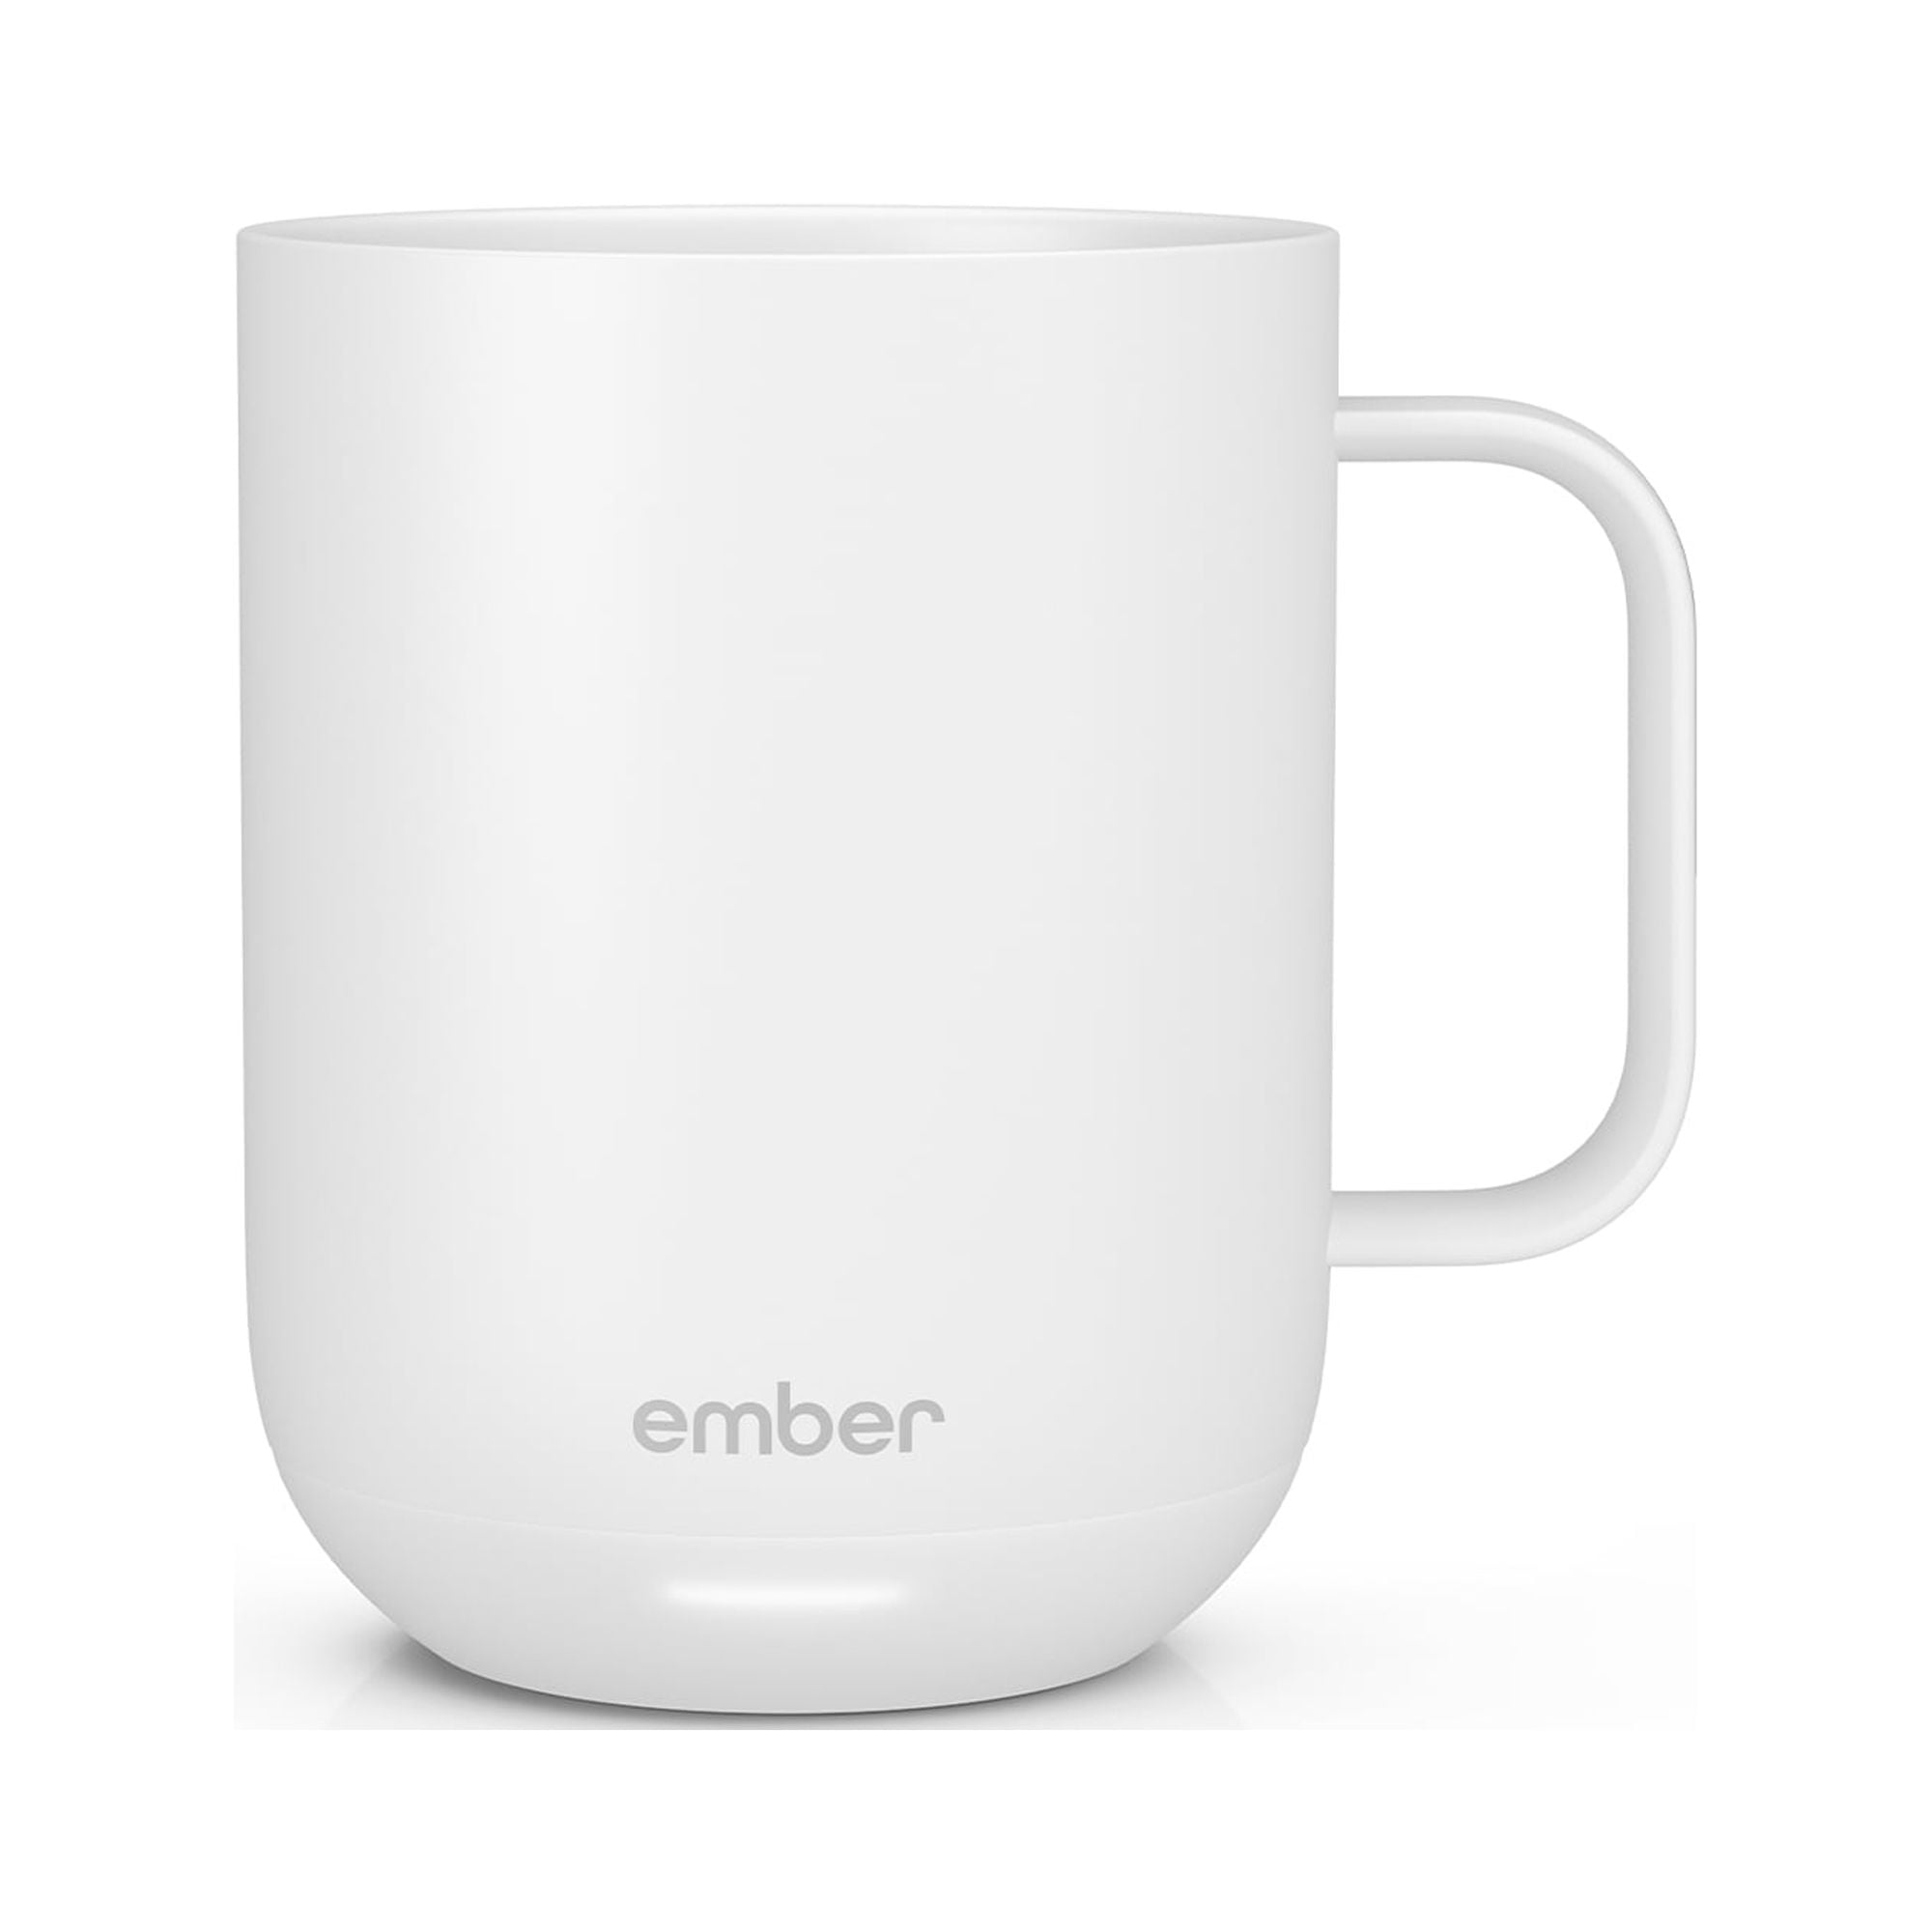 Ember's Smart Temperature Control Tumbler now $90 for today only (Reg. $150)